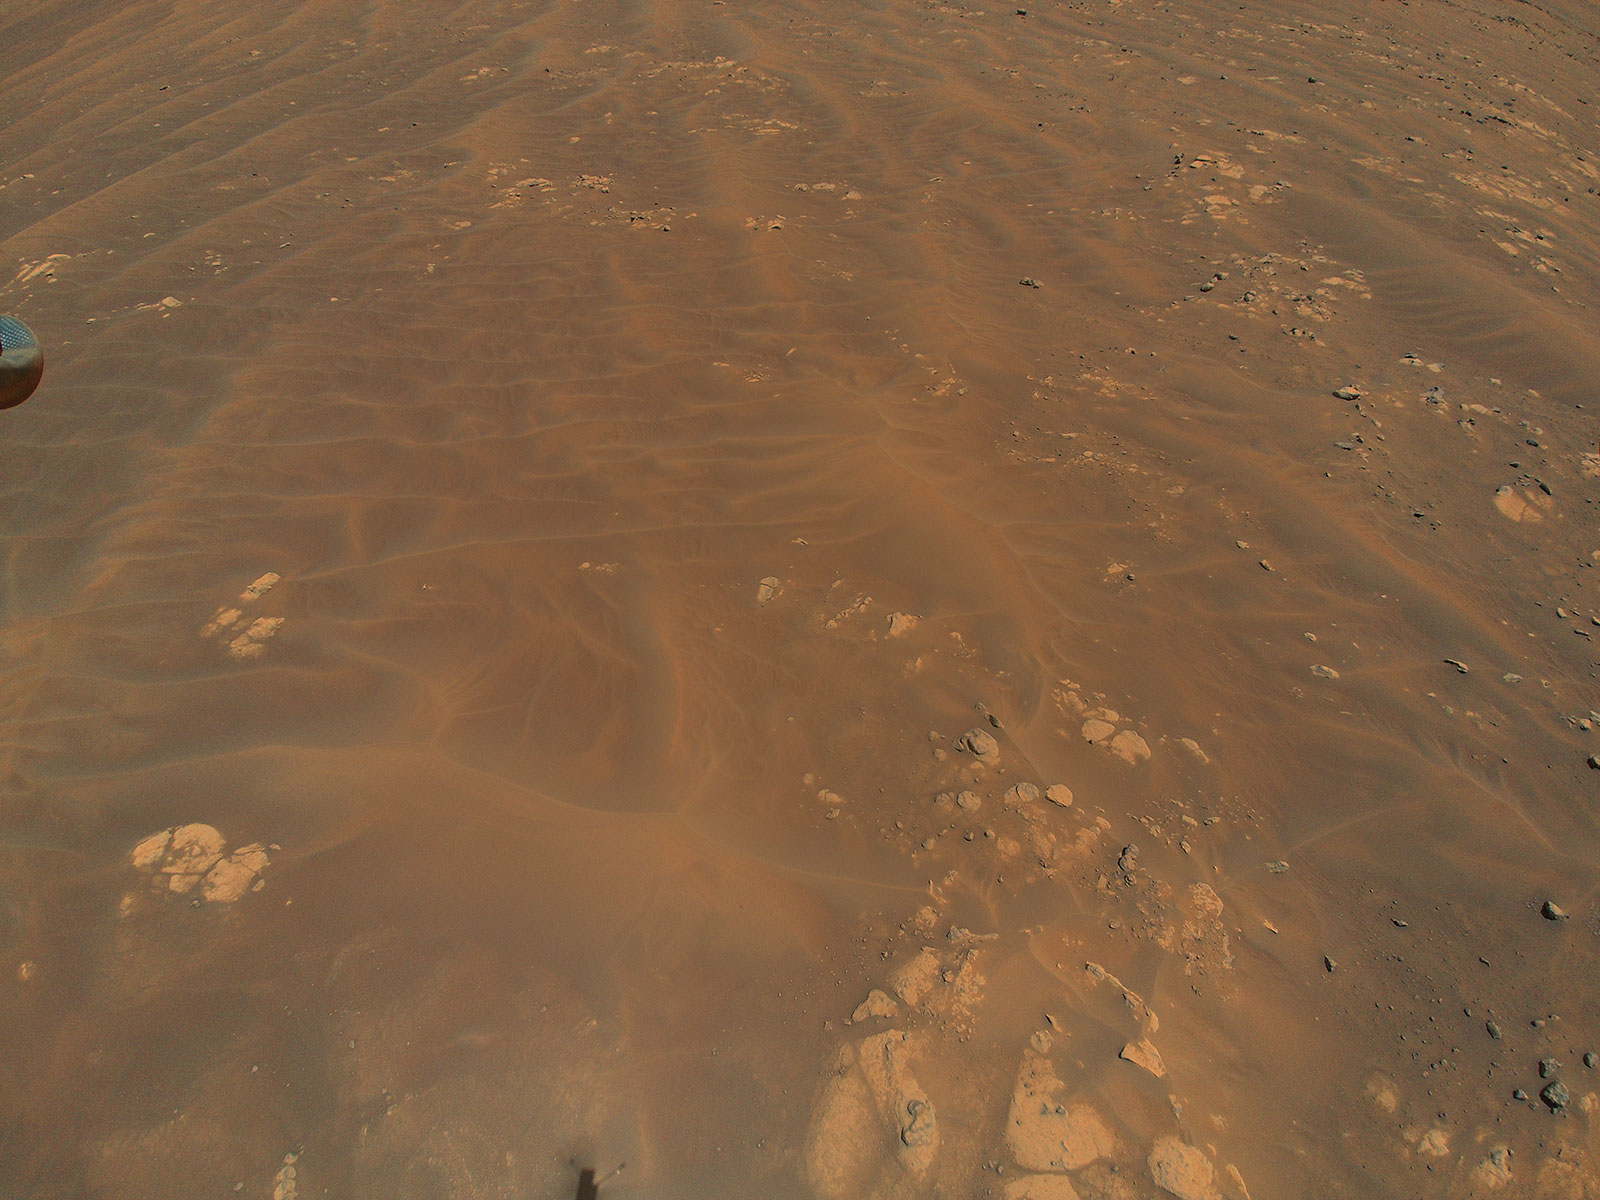 NASA’s Ingenuity Mars Helicopter flew over these sand dunes and rocks during its ninth flight, on July 5, 2021. While the agency’s Perseverance Mars can’t risk getting stuck in this sand, scientists are still able to learn about this region by studying it from Ingenuity’s images.